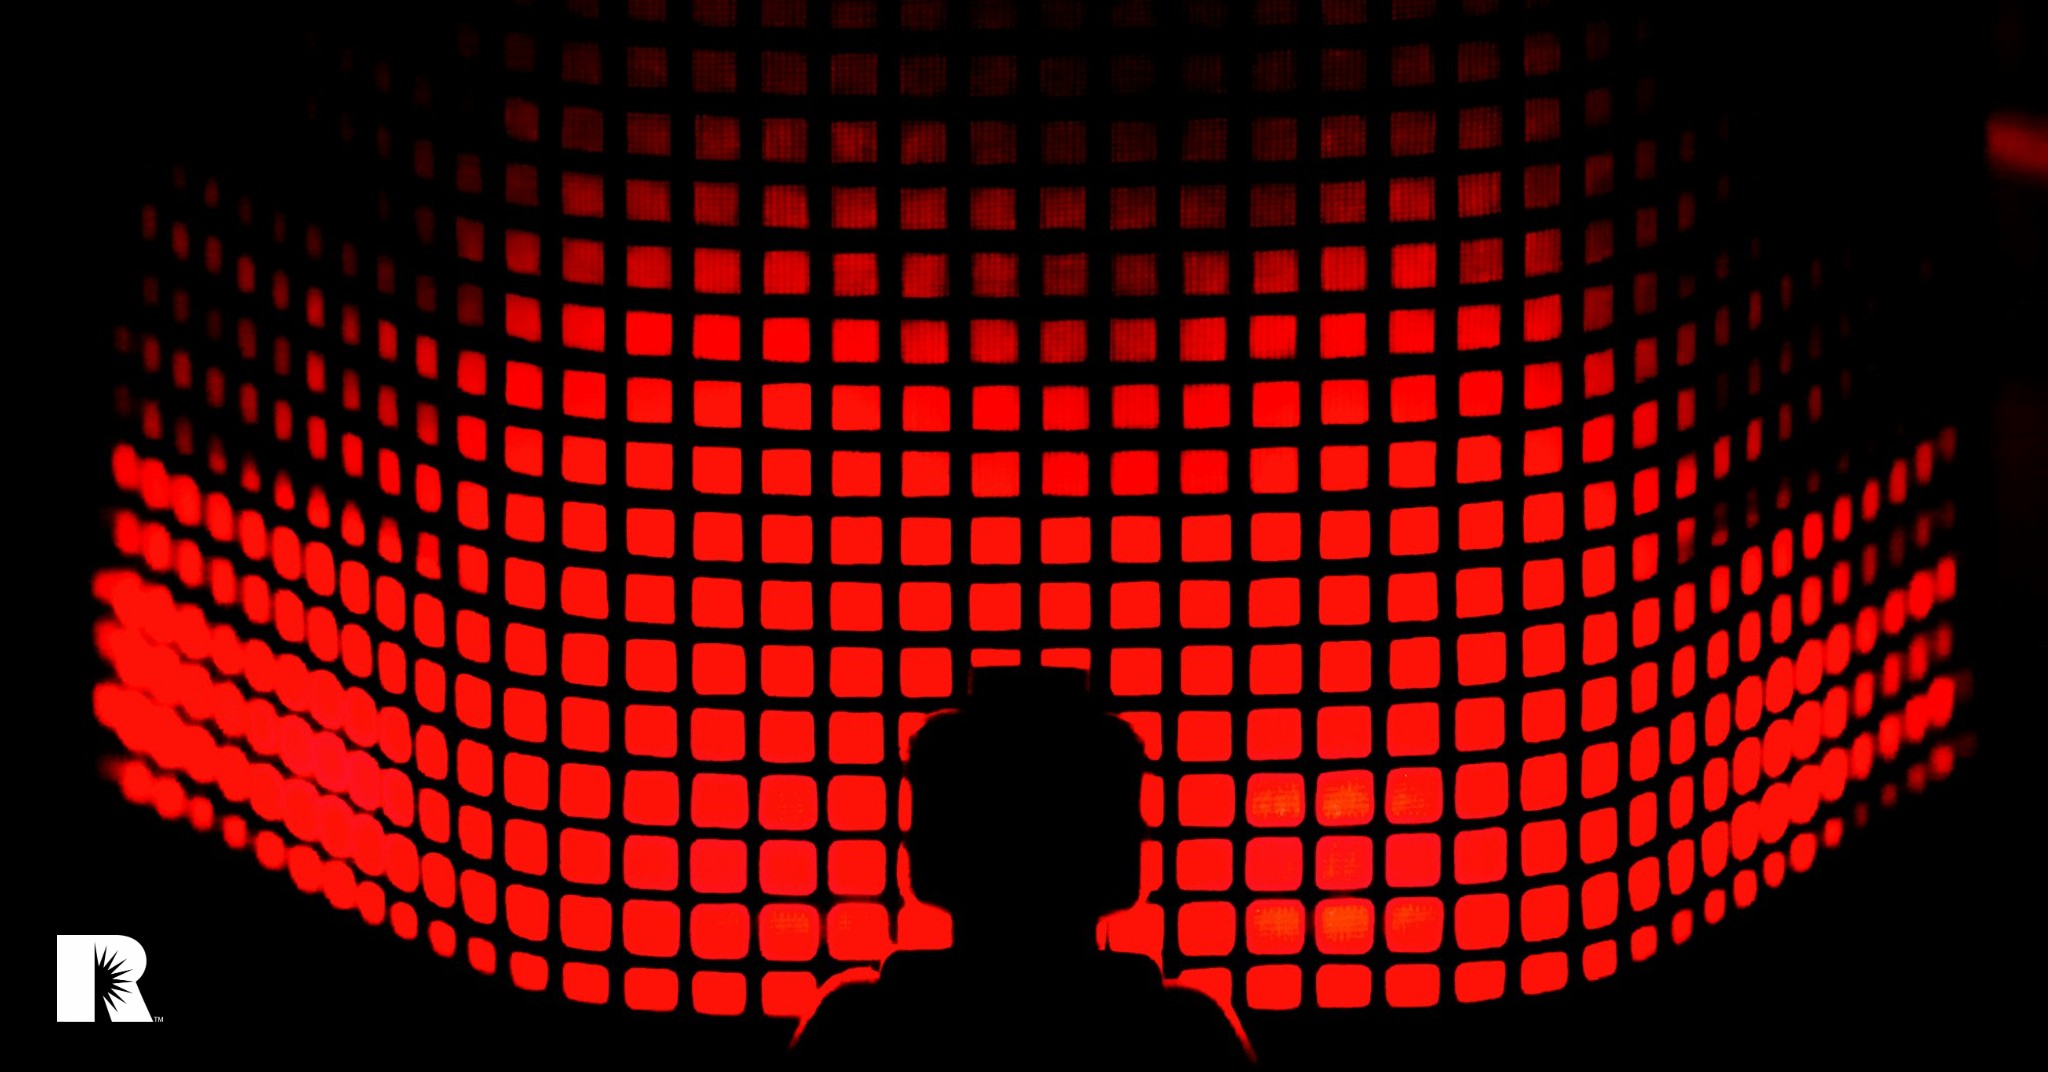 An image of a boy's silhouette against a red field of data bytes.